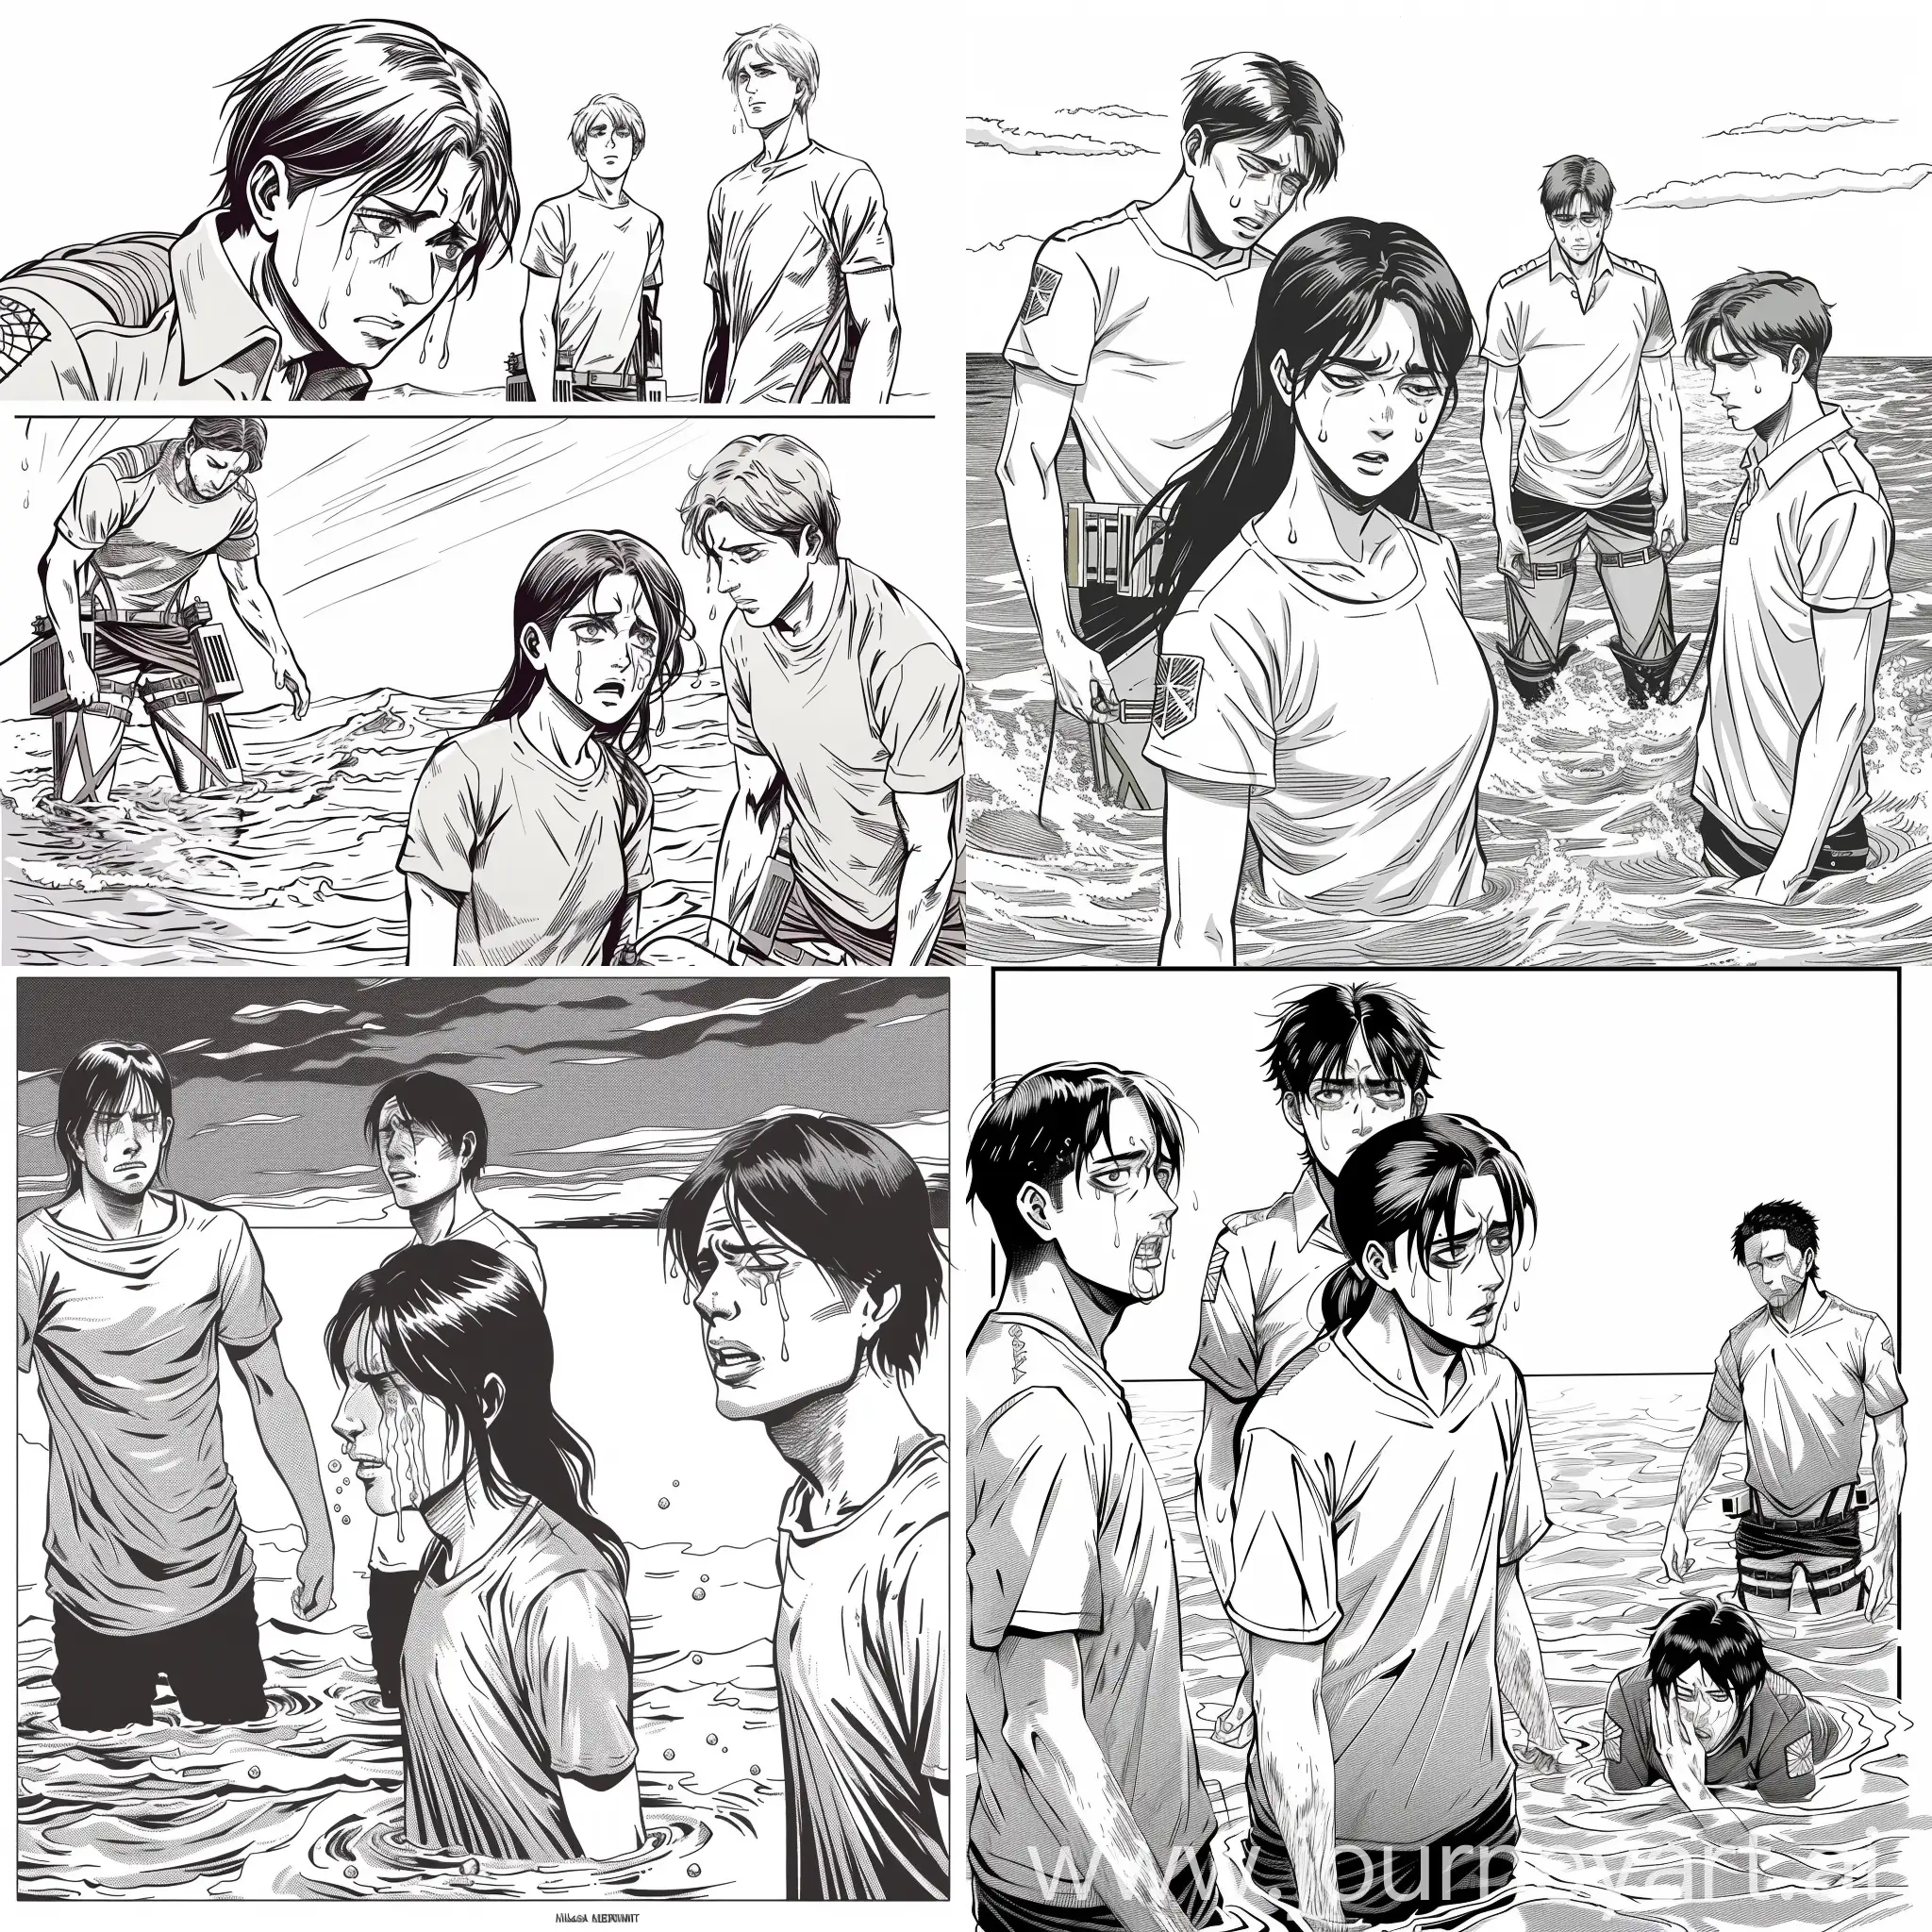 Emotional-Moment-Mikasa-Cries-as-Erens-Words-Resonate-Attack-on-Titan-Manga-Page